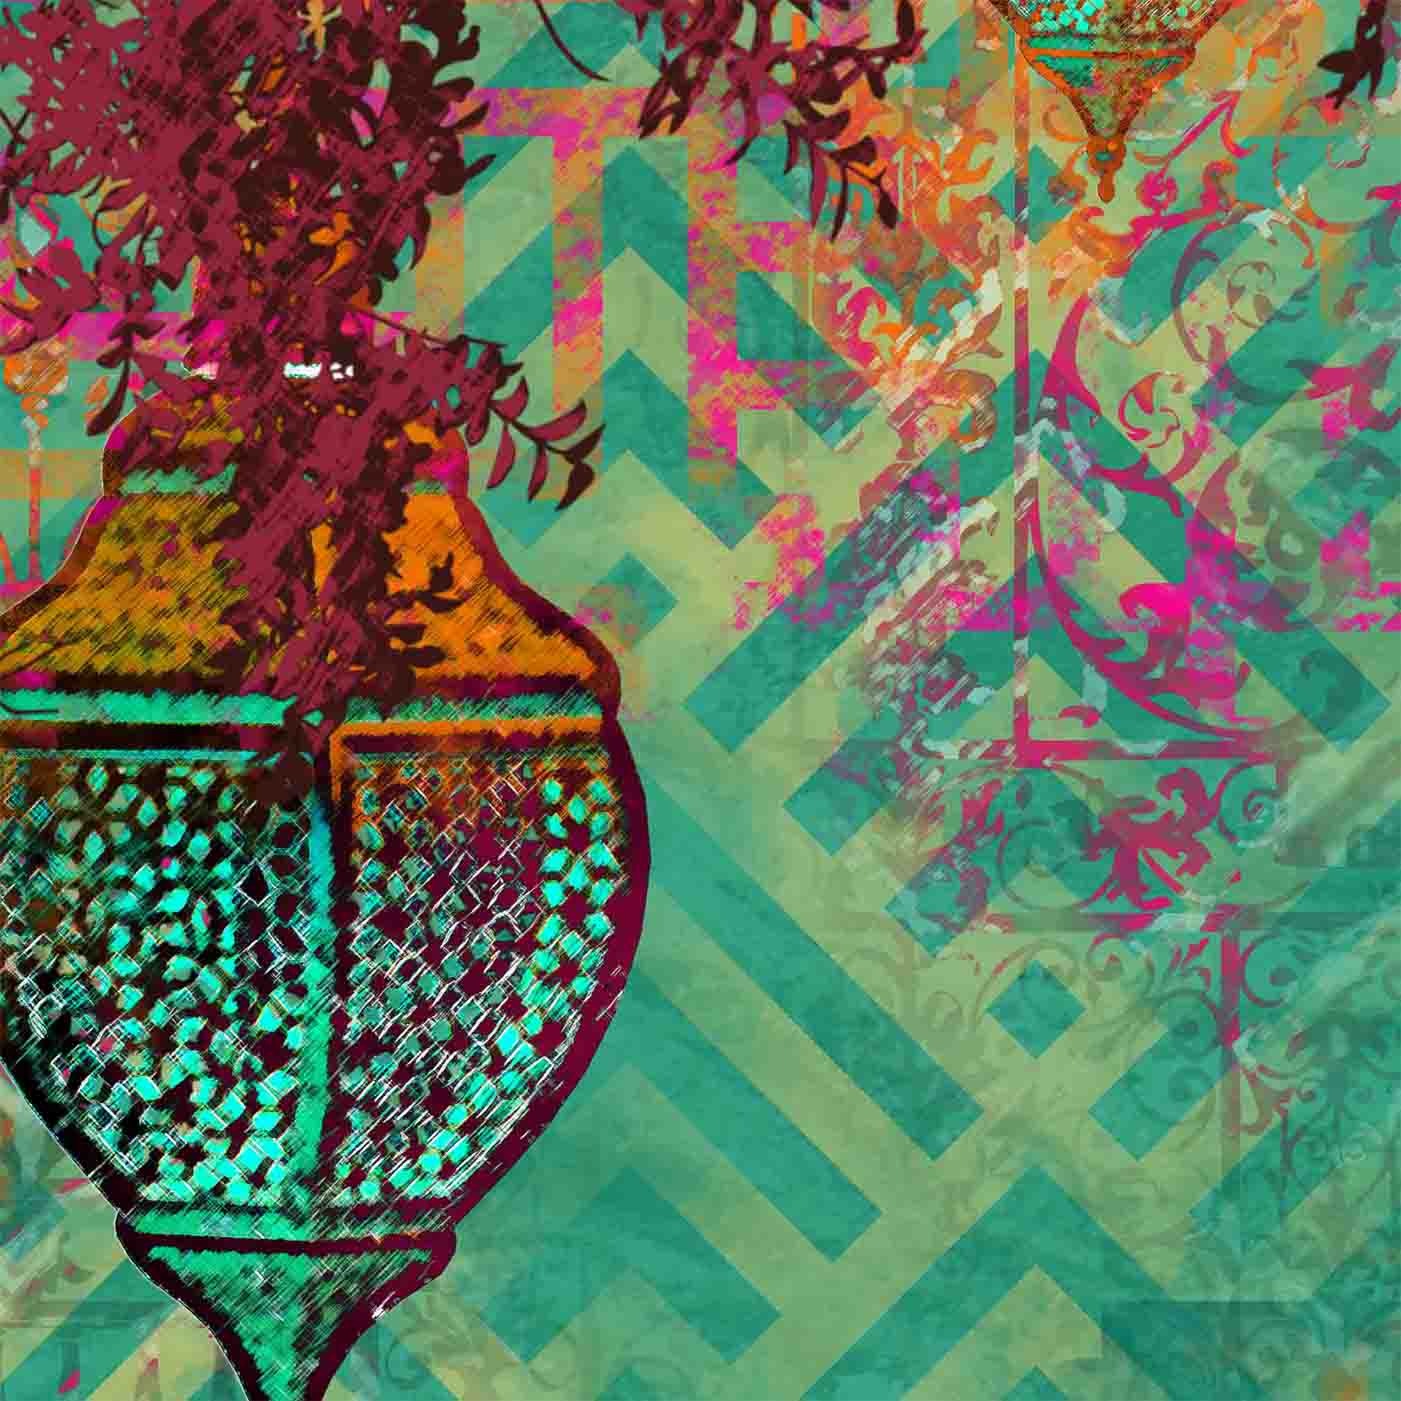 Customised Quirky Abstract Mughal Themed Wallpaper